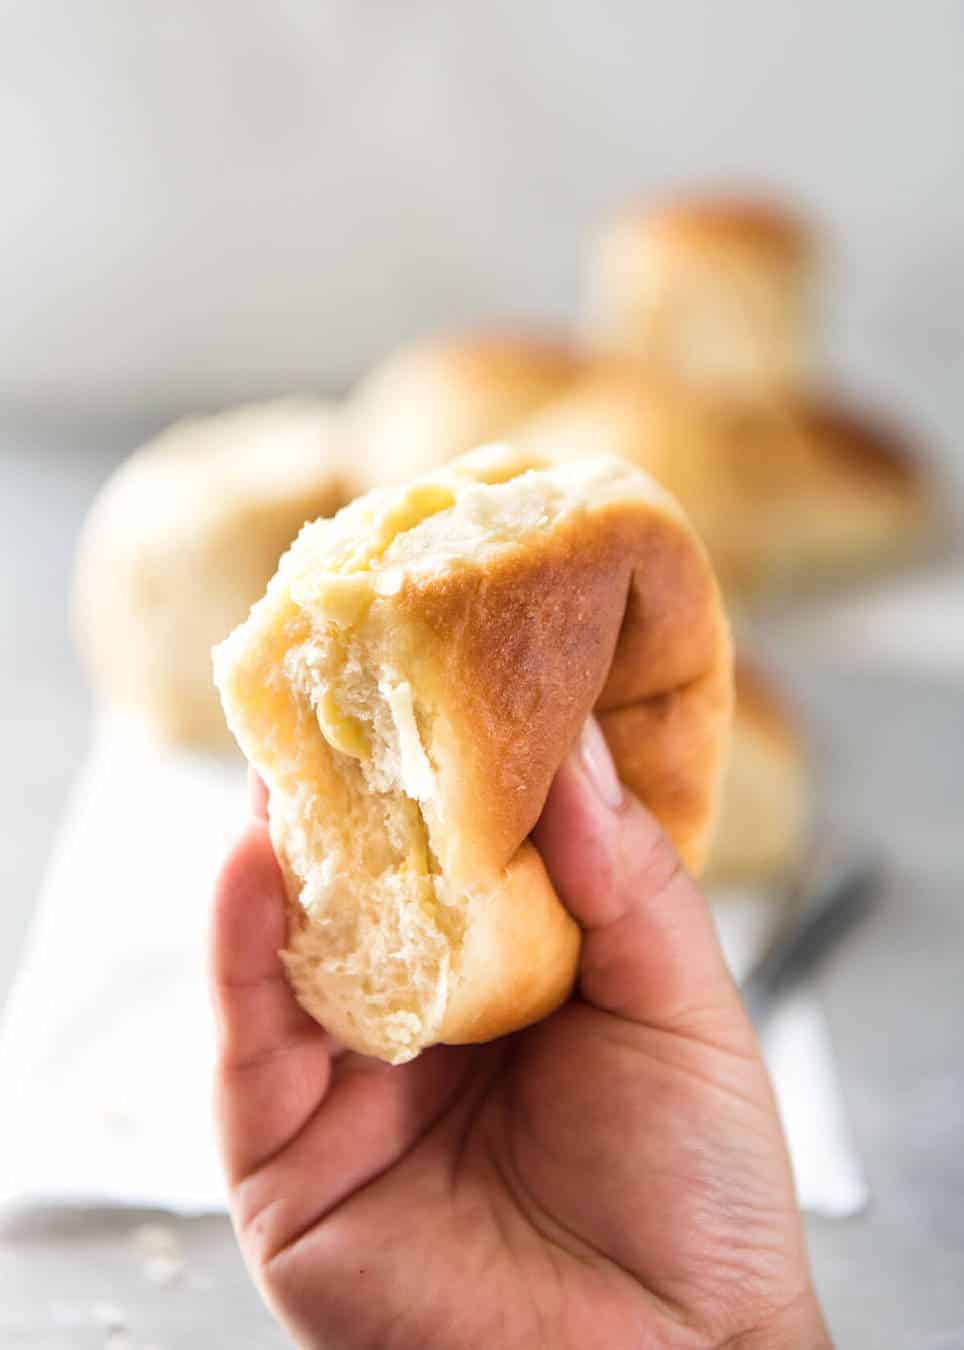 Hand squeezing no knead dinner rolls to show how soft and fluffy they are.